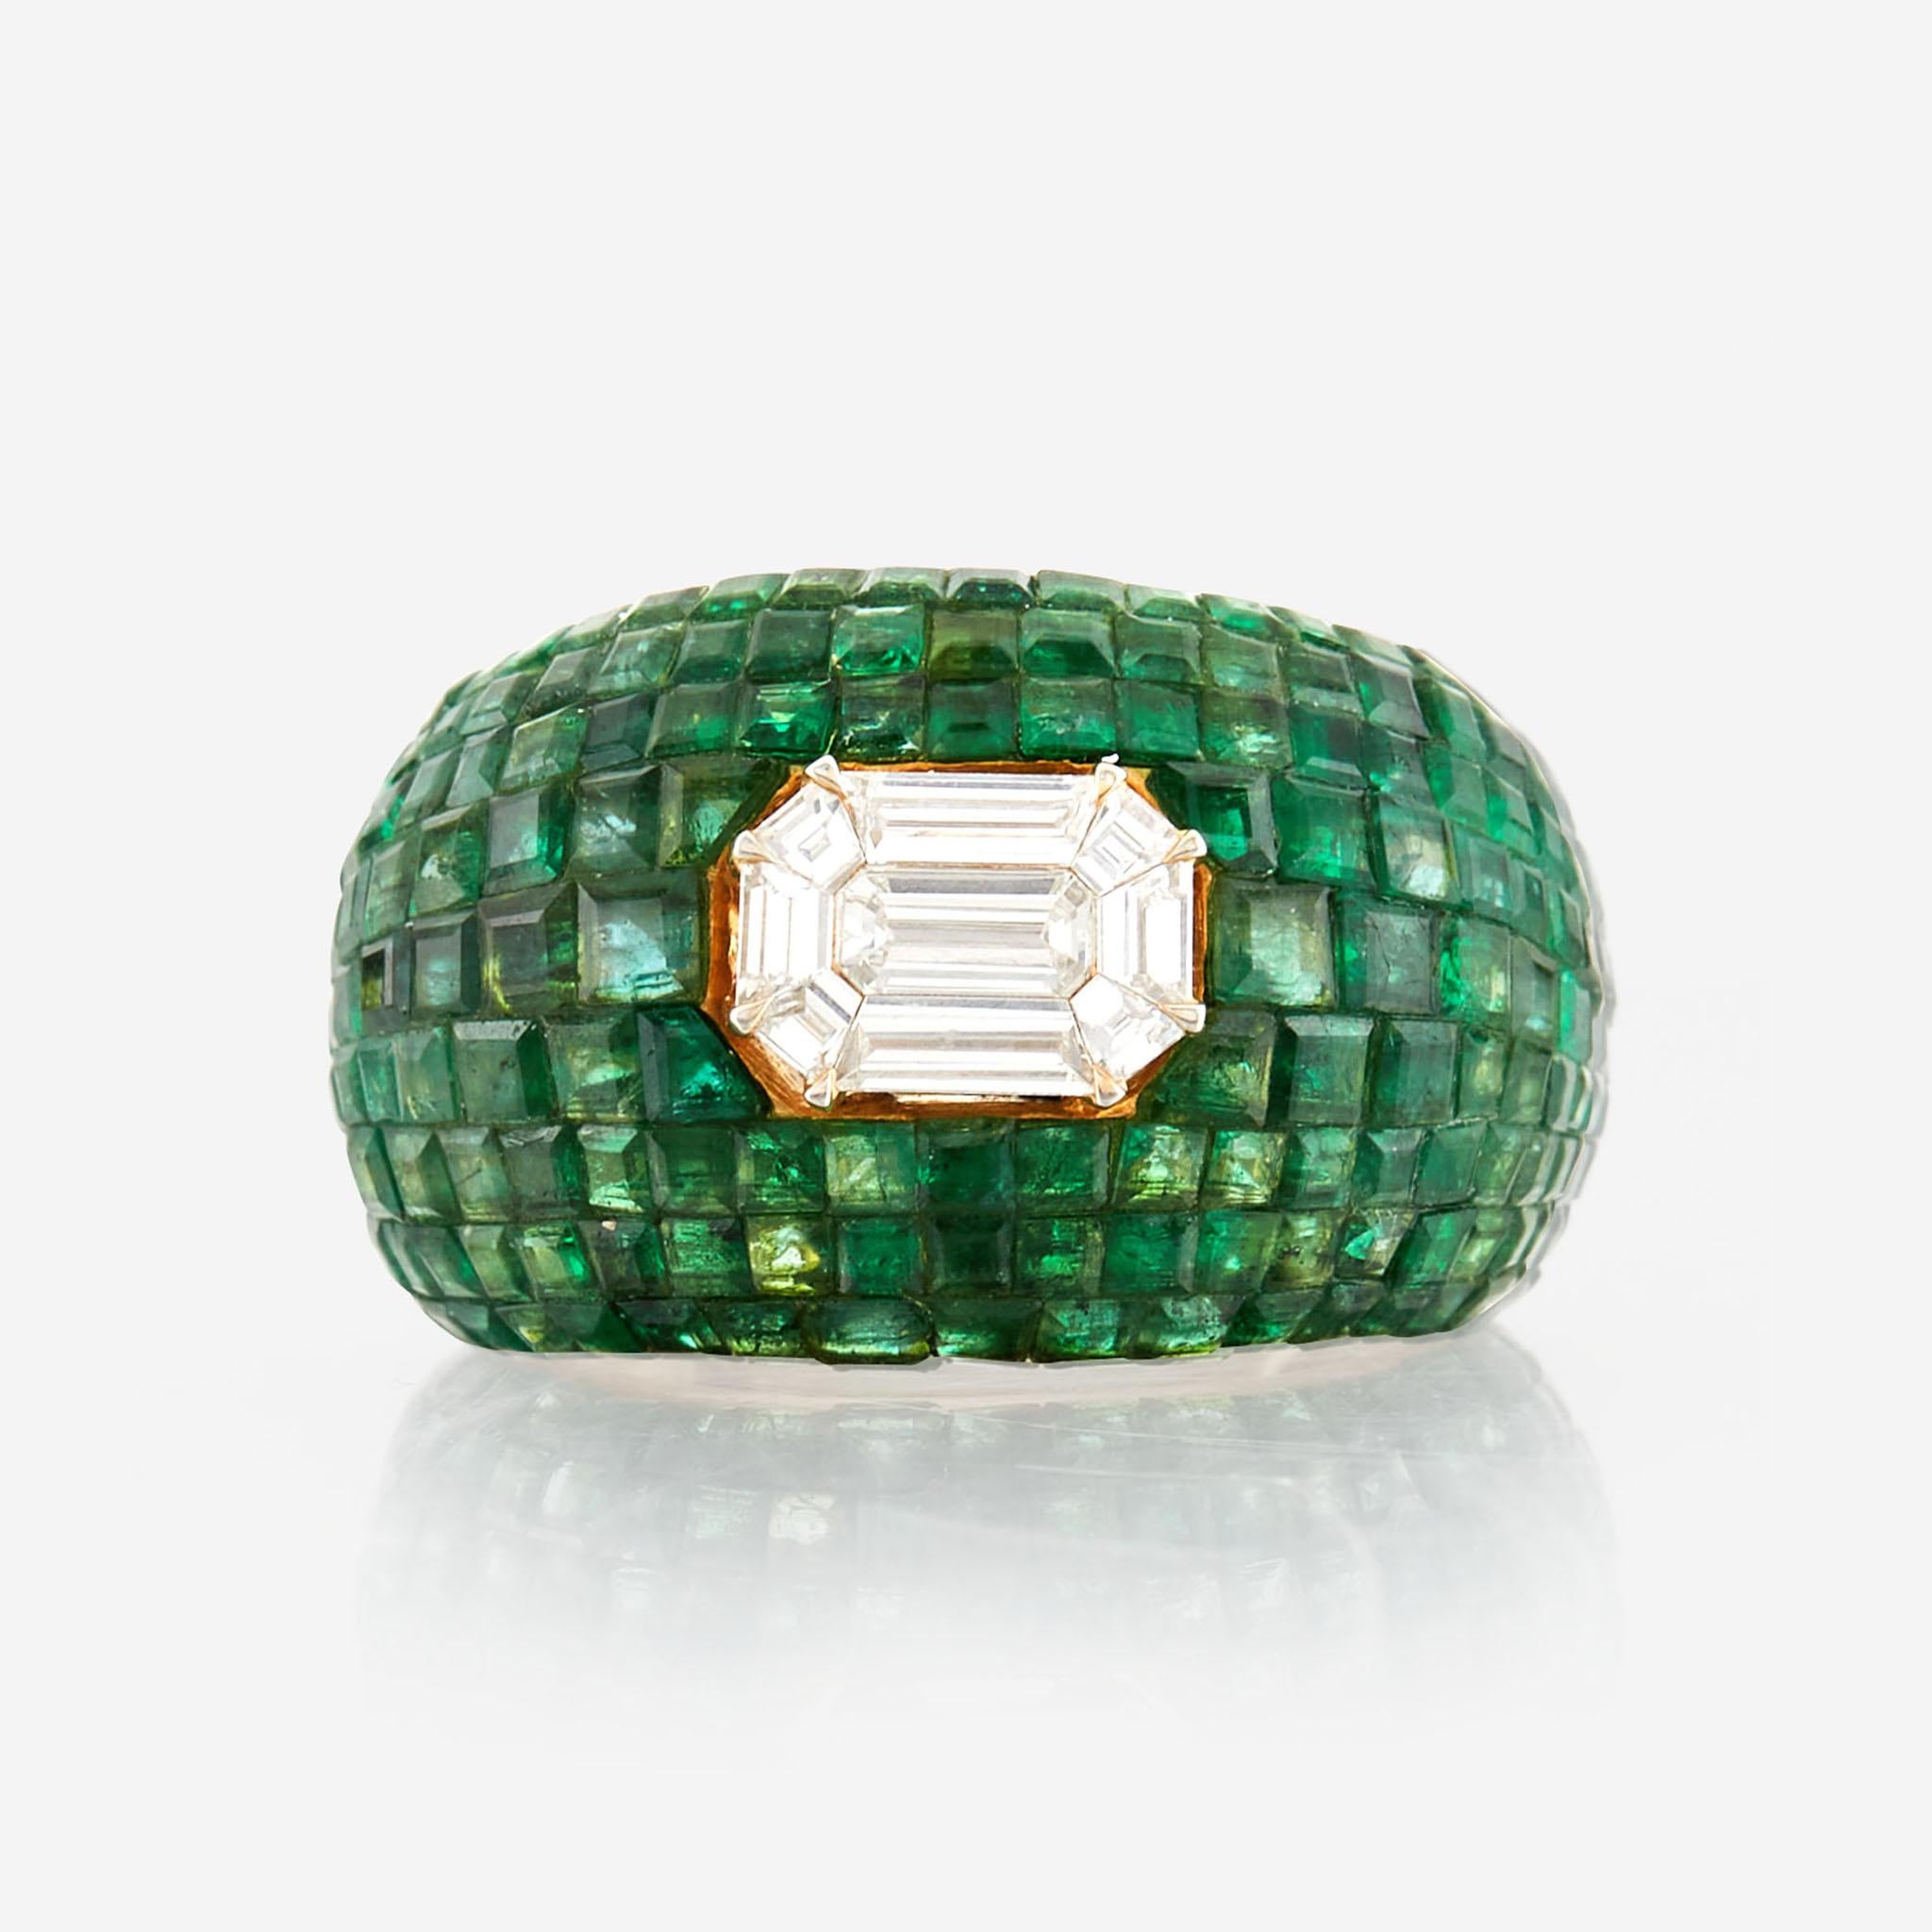 This stunning 18K yellow gold bombe ring features a sparkling pie cut diamond, surrounded by beautiful invisibly set emeralds. The total weight of the emeralds is an impressive 6.6 carats, while the center diamonds weigh in at 0.7 carats. The